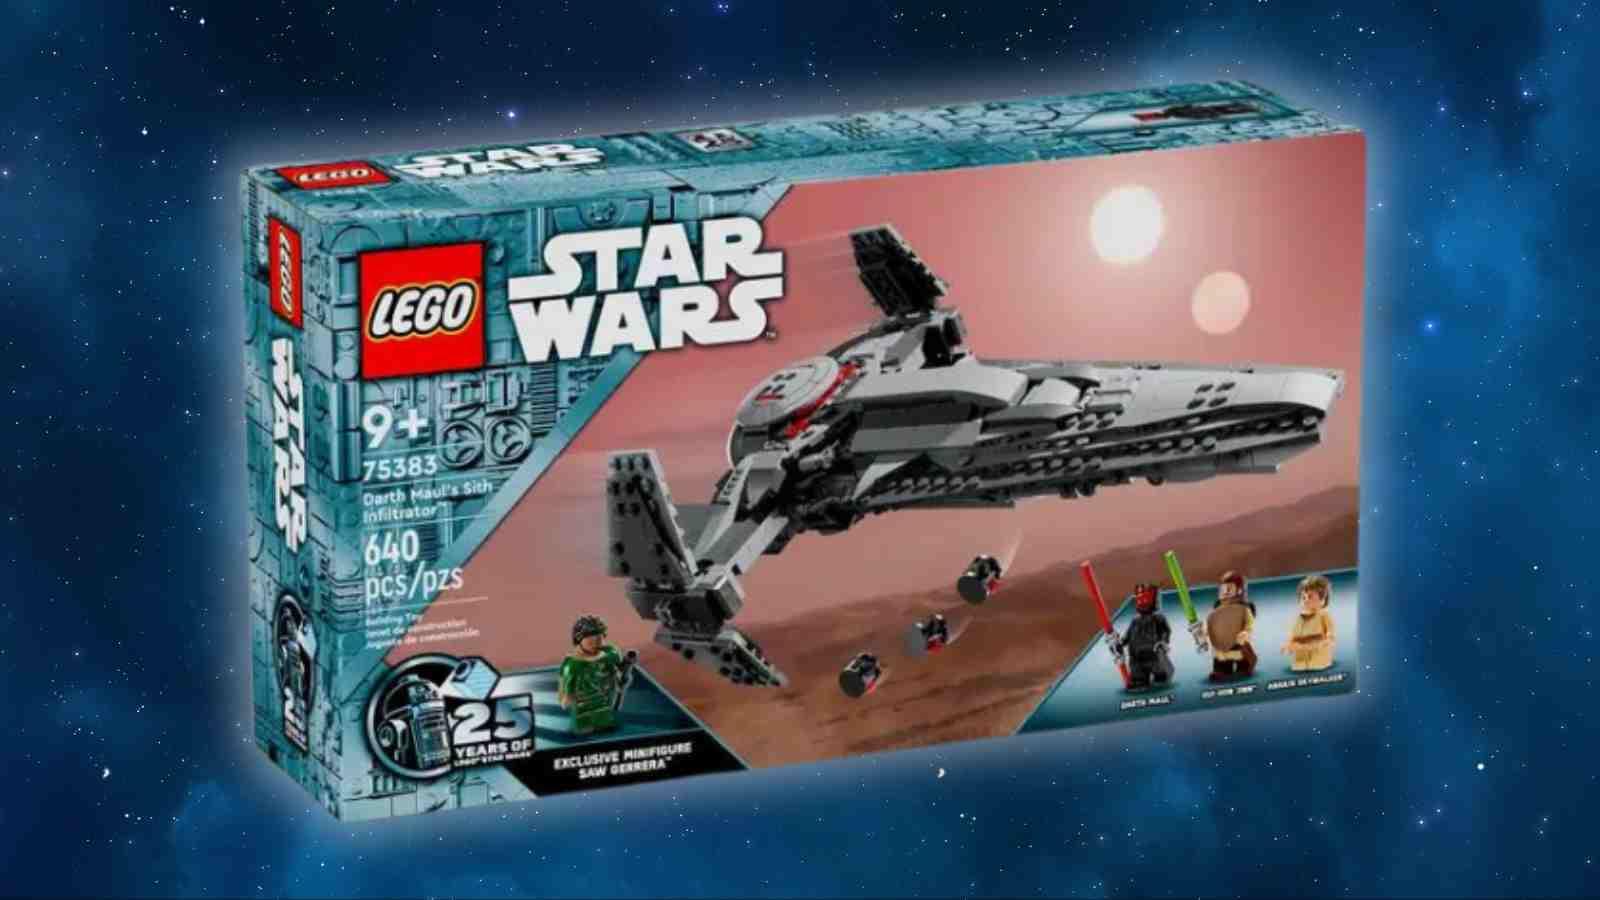 The LEGO-reimagined Darth Maul’s Sith Infiltrator on a galaxy background